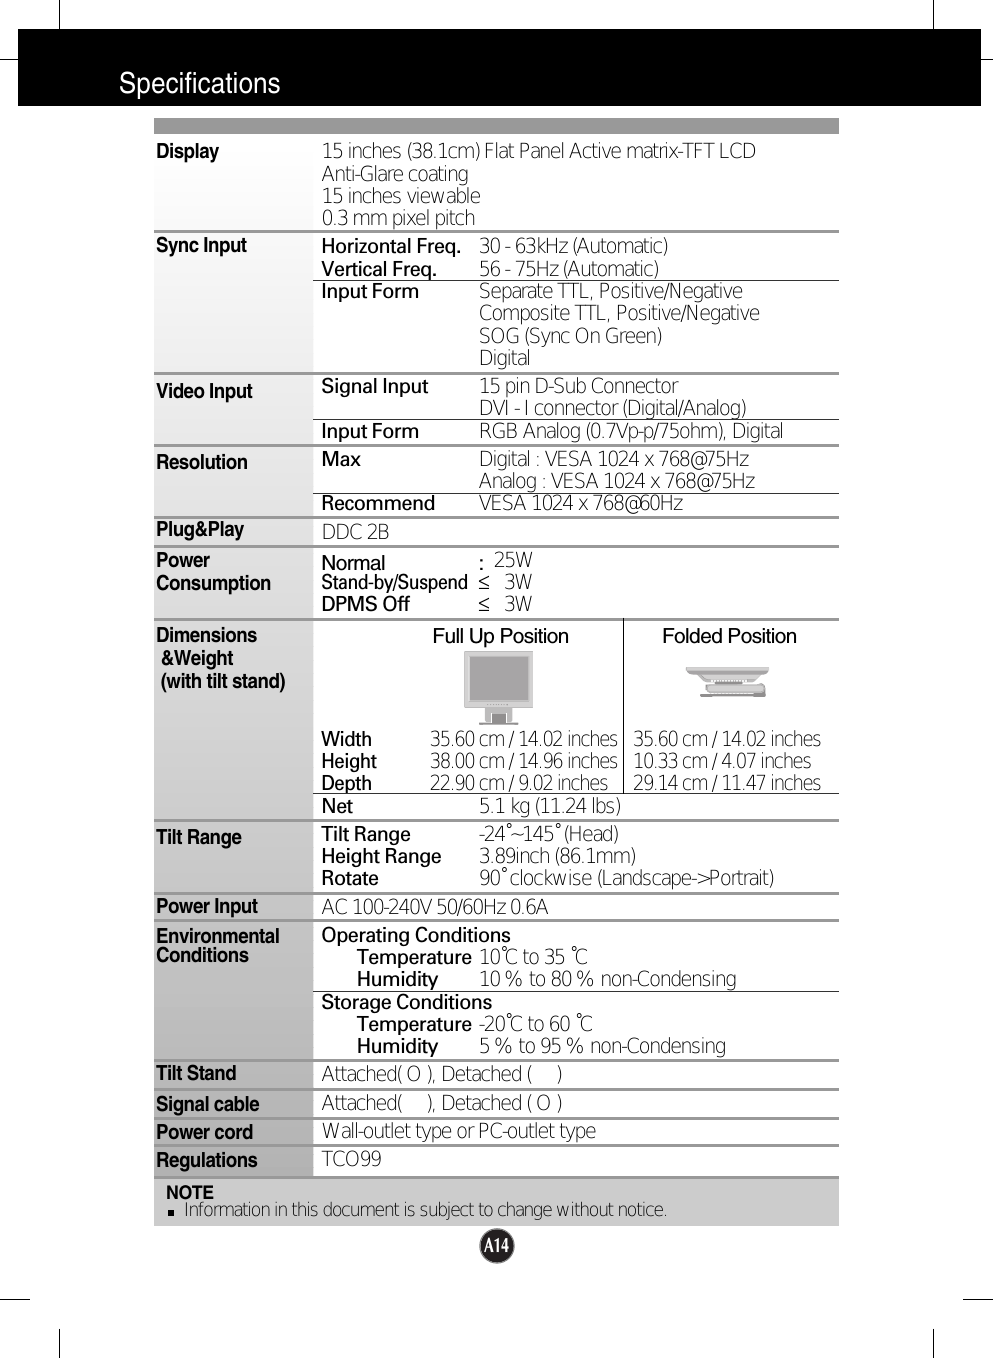 A14SpecificationsNOTEInformation in this document is subject to change without notice.15 inches (38.1cm) Flat Panel Active matrix-TFT LCD Anti-Glare coating15 inches viewable0.3 mm pixel pitchHorizontal Freq. 30 - 63kHz (Automatic)Vertical Freq. 56 - 75Hz (Automatic)Input Form Separate TTL, Positive/NegativeComposite TTL, Positive/NegativeSOG (Sync On Green) DigitalSignal Input 15 pin D-Sub ConnectorDVI - I connector (Digital/Analog)Input Form RGB Analog (0.7Vp-p/75ohm), DigitalMax Digital : VESA 1024 x 768@75Hz Analog : VESA 1024 x 768@75HzRecommend VESA 1024 x 768@60HzDDC 2BNormal : 25WStand-by/Suspend≤3WDPMS Off ≤3WFull Up Position Folded PositionWidth 35.60 cm / 14.02 inches 35.60 cm / 14.02 inchesHeight 38.00 cm / 14.96 inches 10.33 cm / 4.07 inchesDepth 22.90 cm / 9.02 inches 29.14 cm / 11.47 inchesNet 5.1 kg (11.24 lbs)Tilt Range -24˚~145˚ (Head)Height Range 3.89inch (86.1mm)Rotate 90˚ clockwise (Landscape-&gt;Portrait)AC 100-240V 50/60Hz 0.6AOperating ConditionsTemperature 10˚C to 35 ˚CHumidity 10 % to 80 % non-CondensingStorage ConditionsTemperature -20˚C to 60 ˚CHumidity 5 % to 95 % non-CondensingAttached( O ), Detached (     )Attached(     ), Detached ( O )Wall-outlet type or PC-outlet typeTCO99DisplaySync InputVideo InputResolutionPlug&amp;PlayPowerConsumptionDimensions&amp;Weight(with tilt stand)Tilt RangePower InputEnvironmentalConditionsTilt StandSignal cablePower cord Regulations